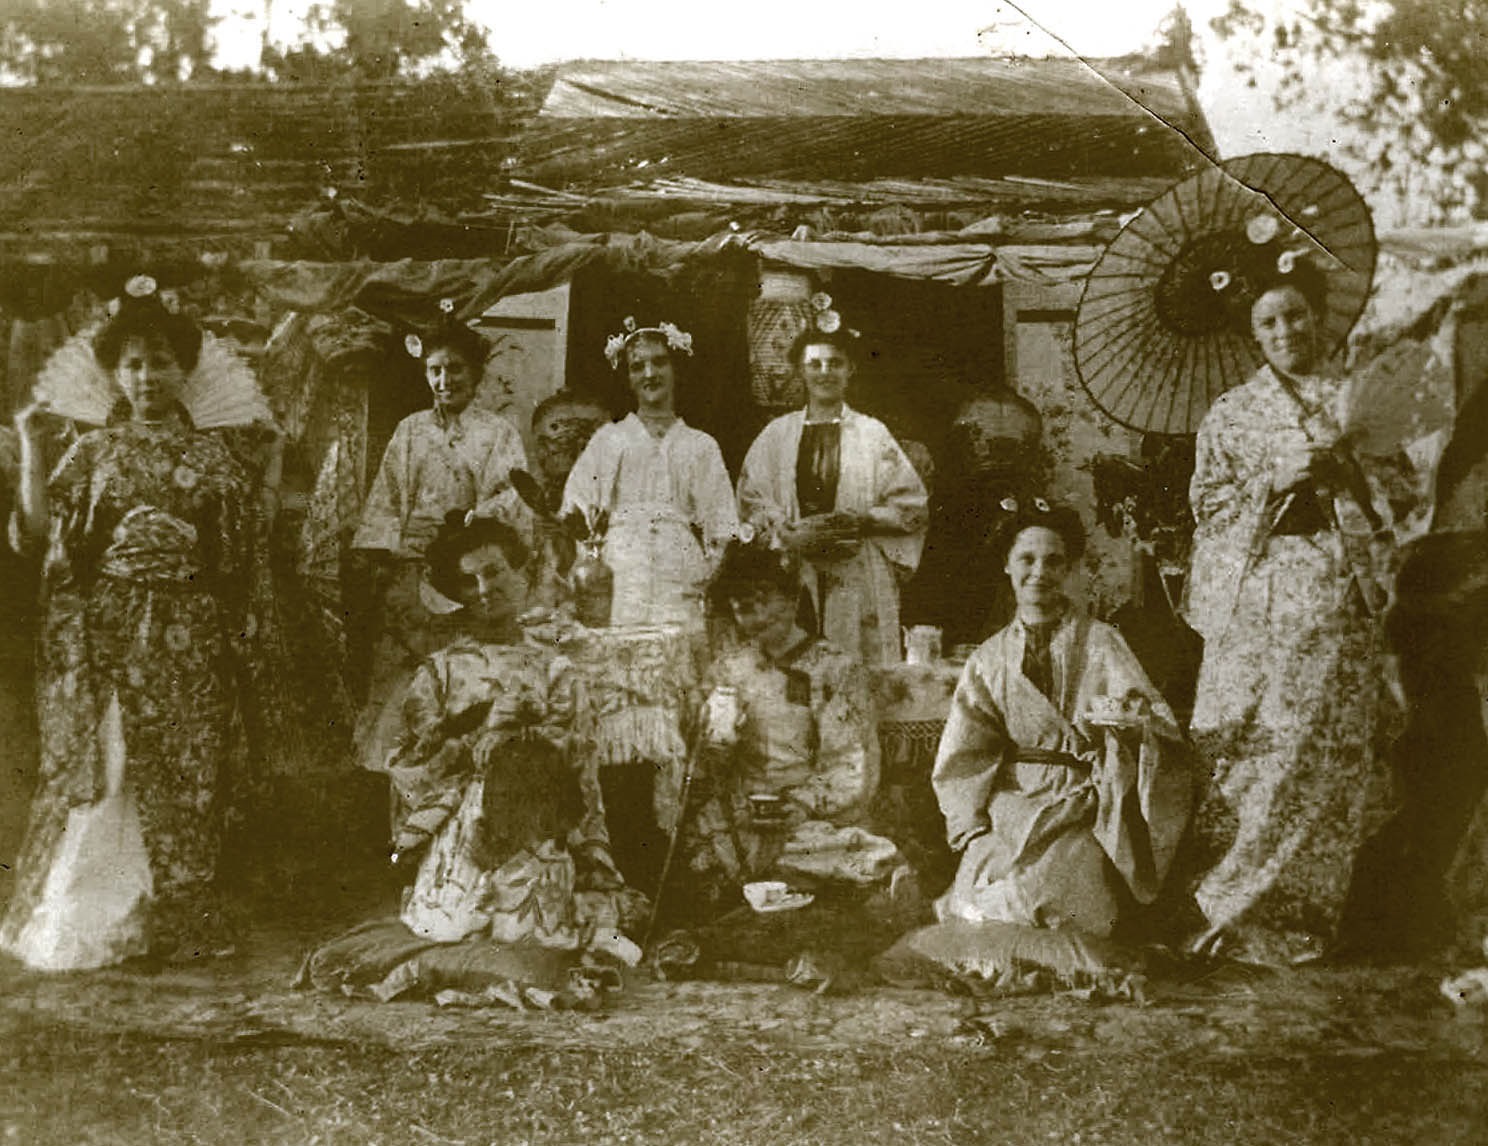 Old photograph of people dressed in Japanese attire